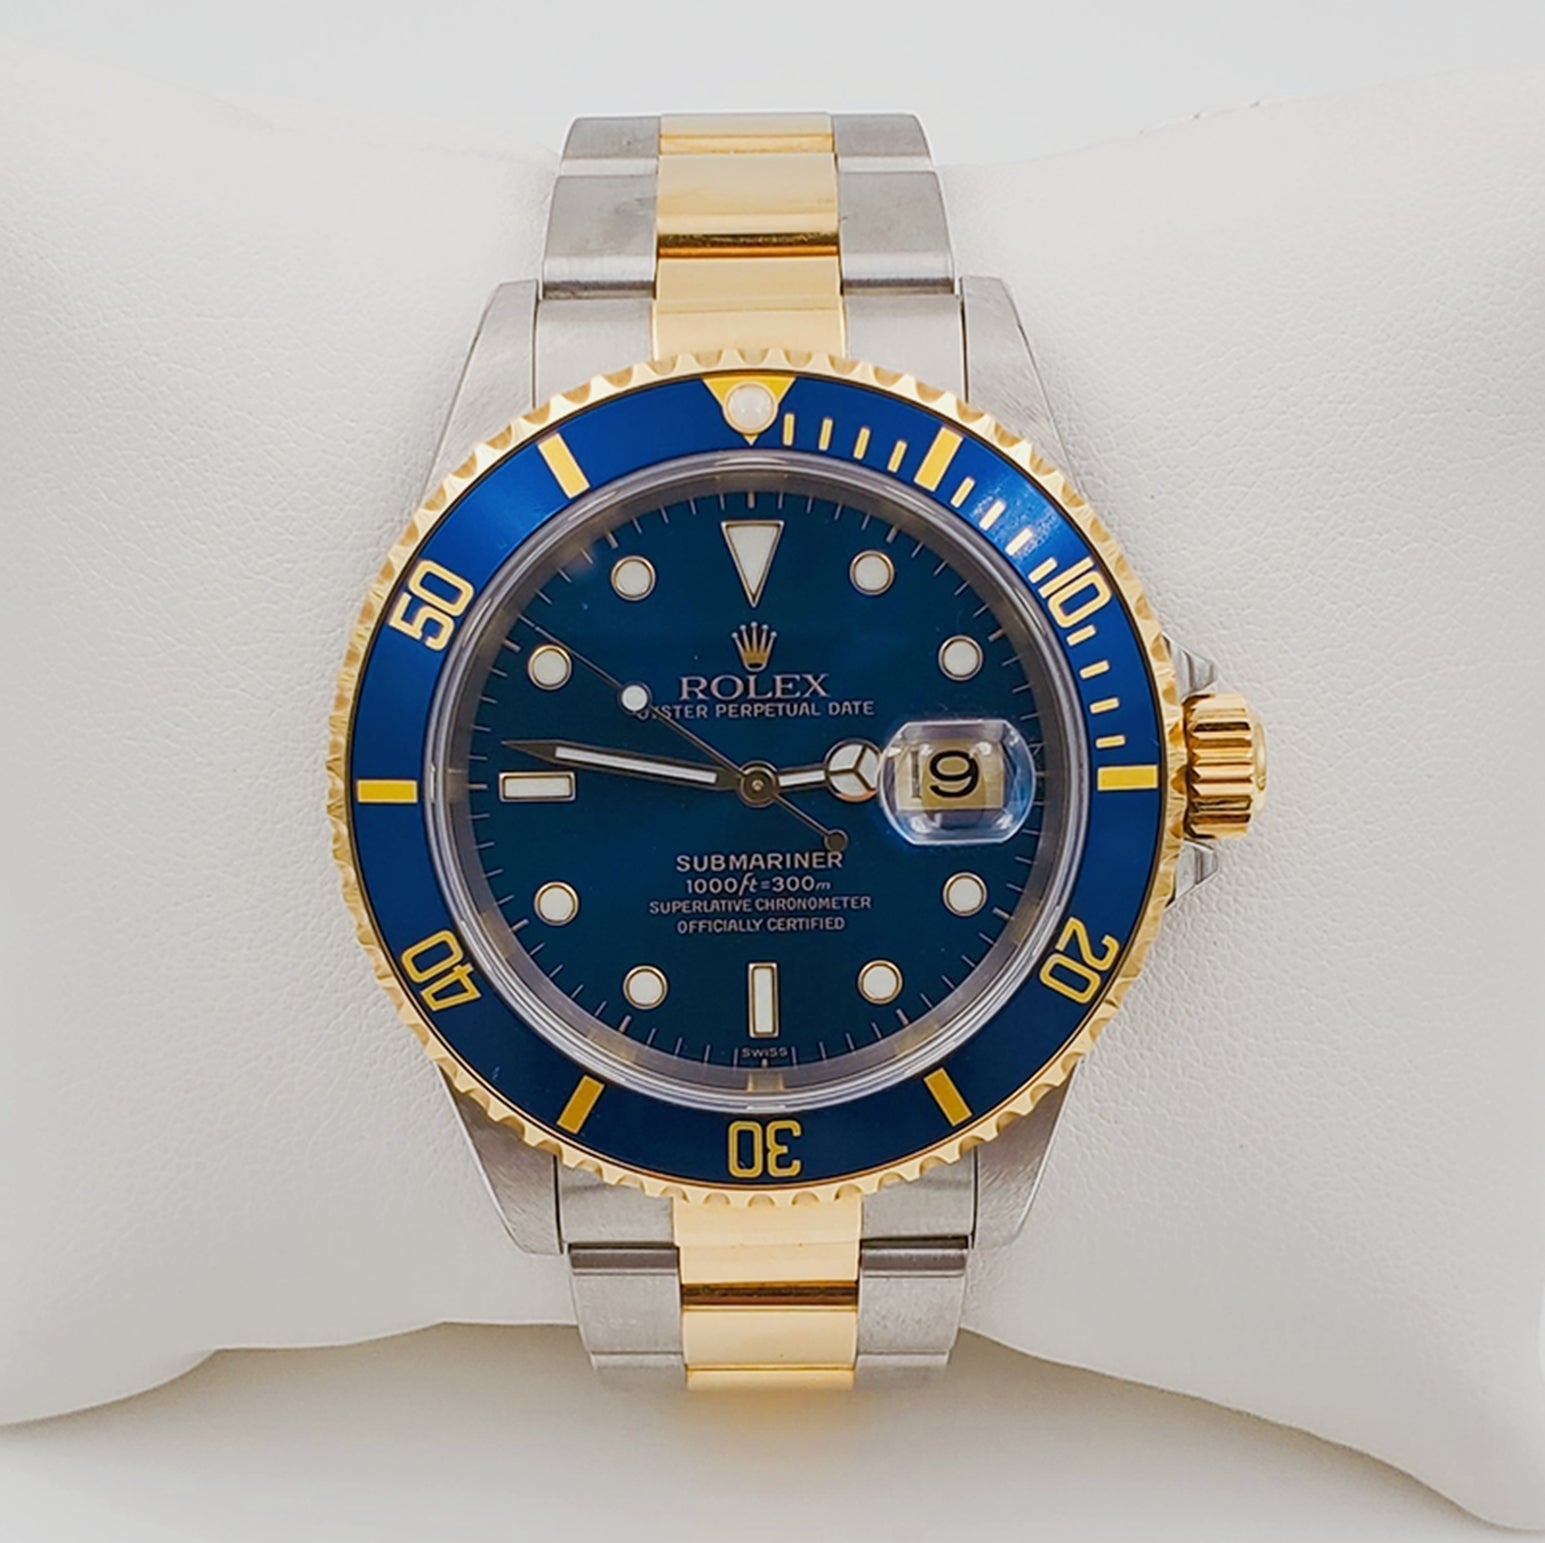 Rolex 2023 Submariner Date Steel & Gold 18K Blue NEW. Full set for $18,500  for sale from a Trusted Seller on Chrono24